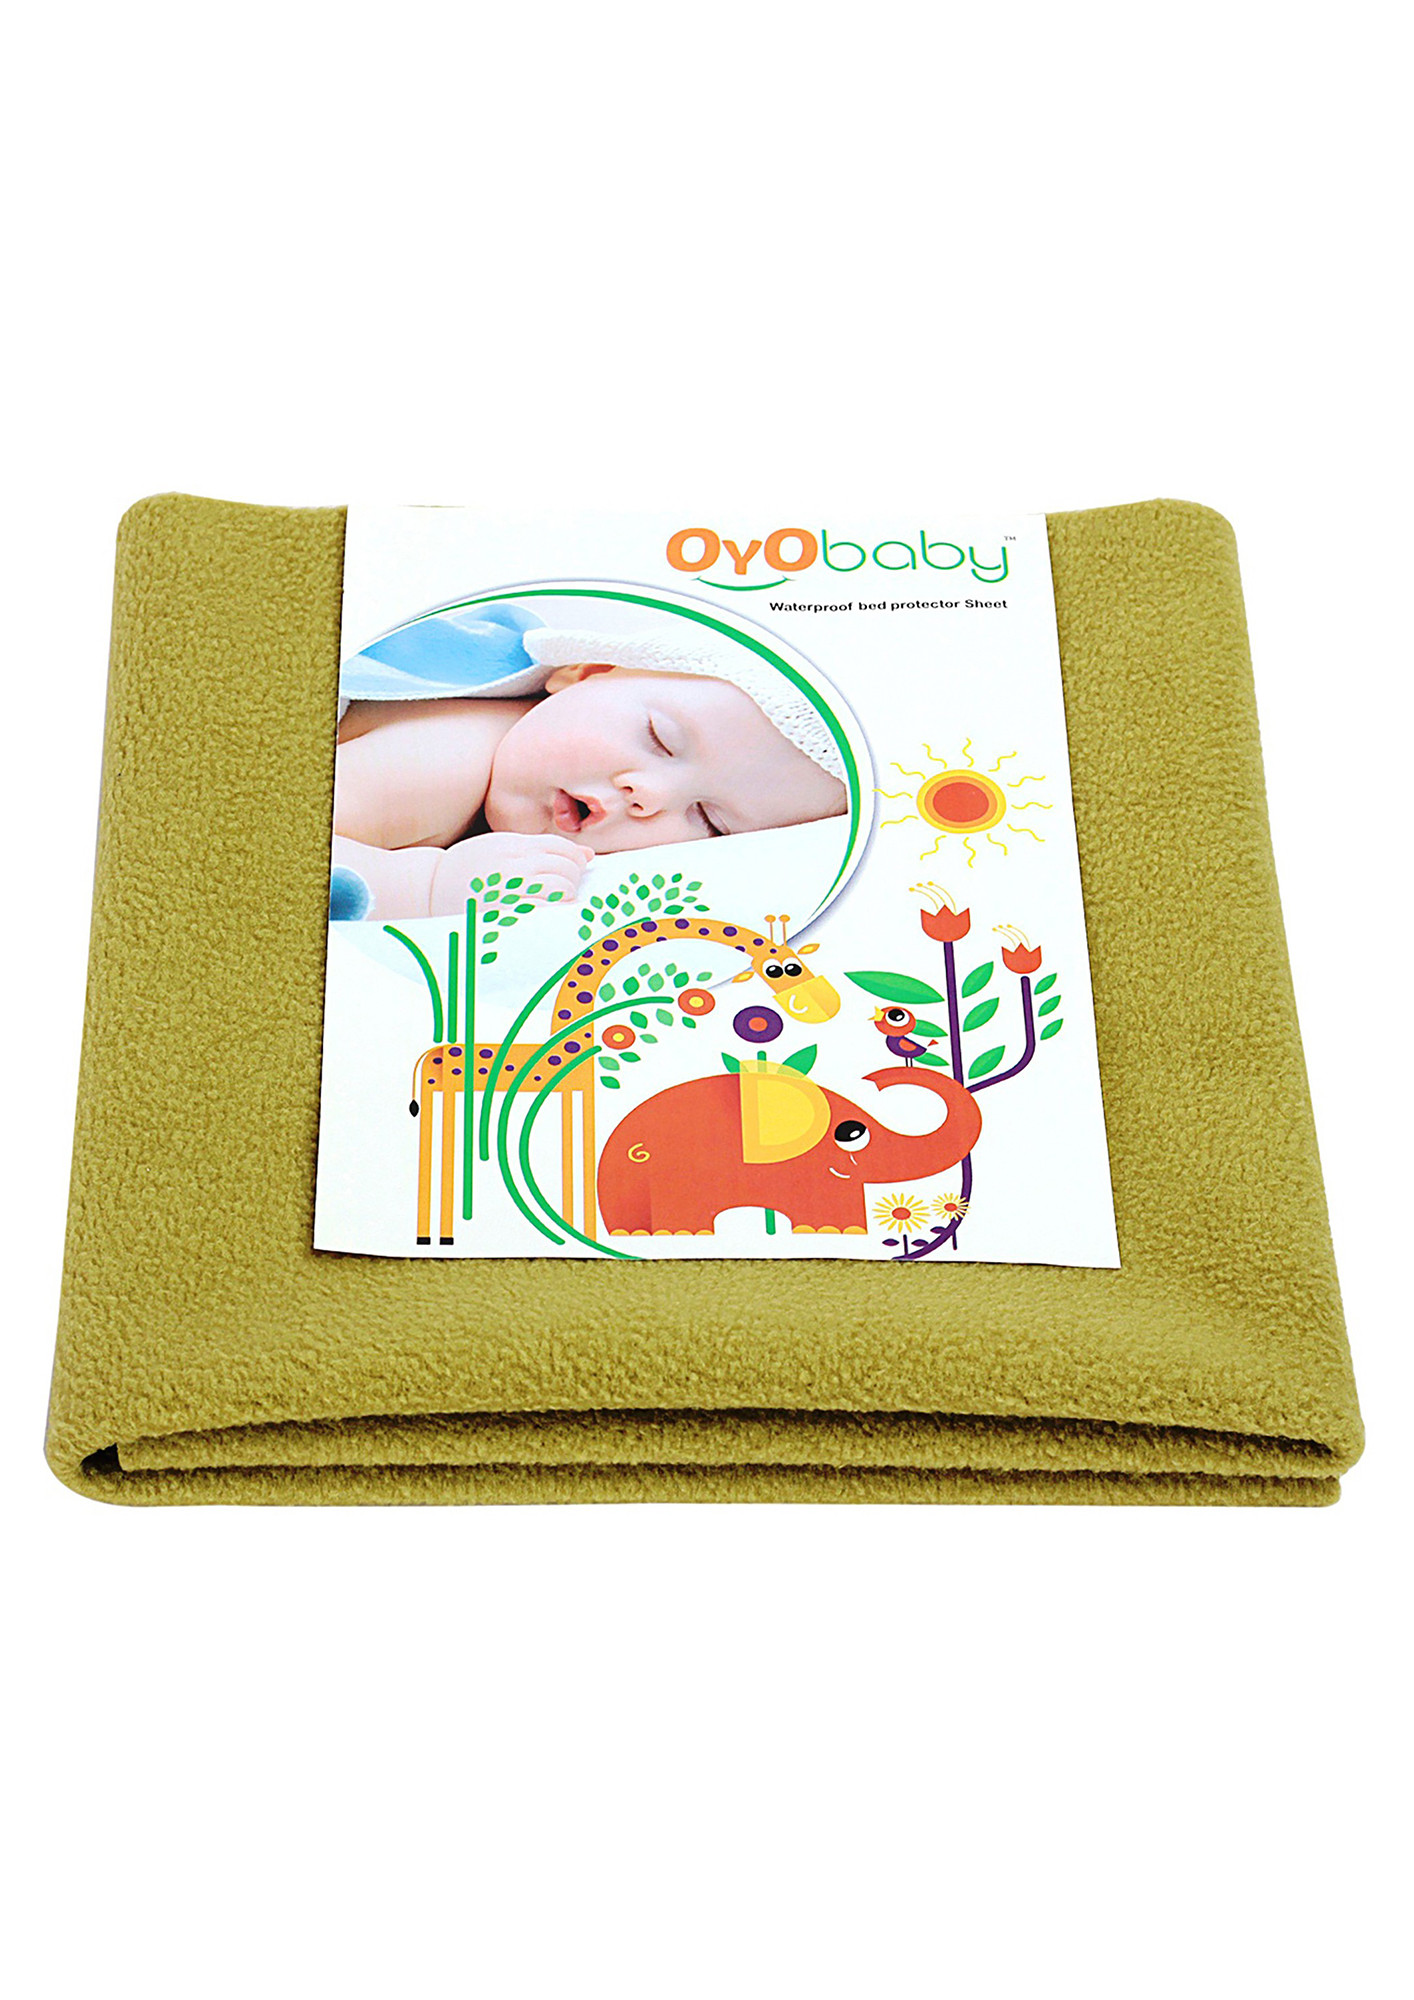 Oyo Baby Cotton Baby Bed Protecting Mat (Gold, Large)-OB-2022-G